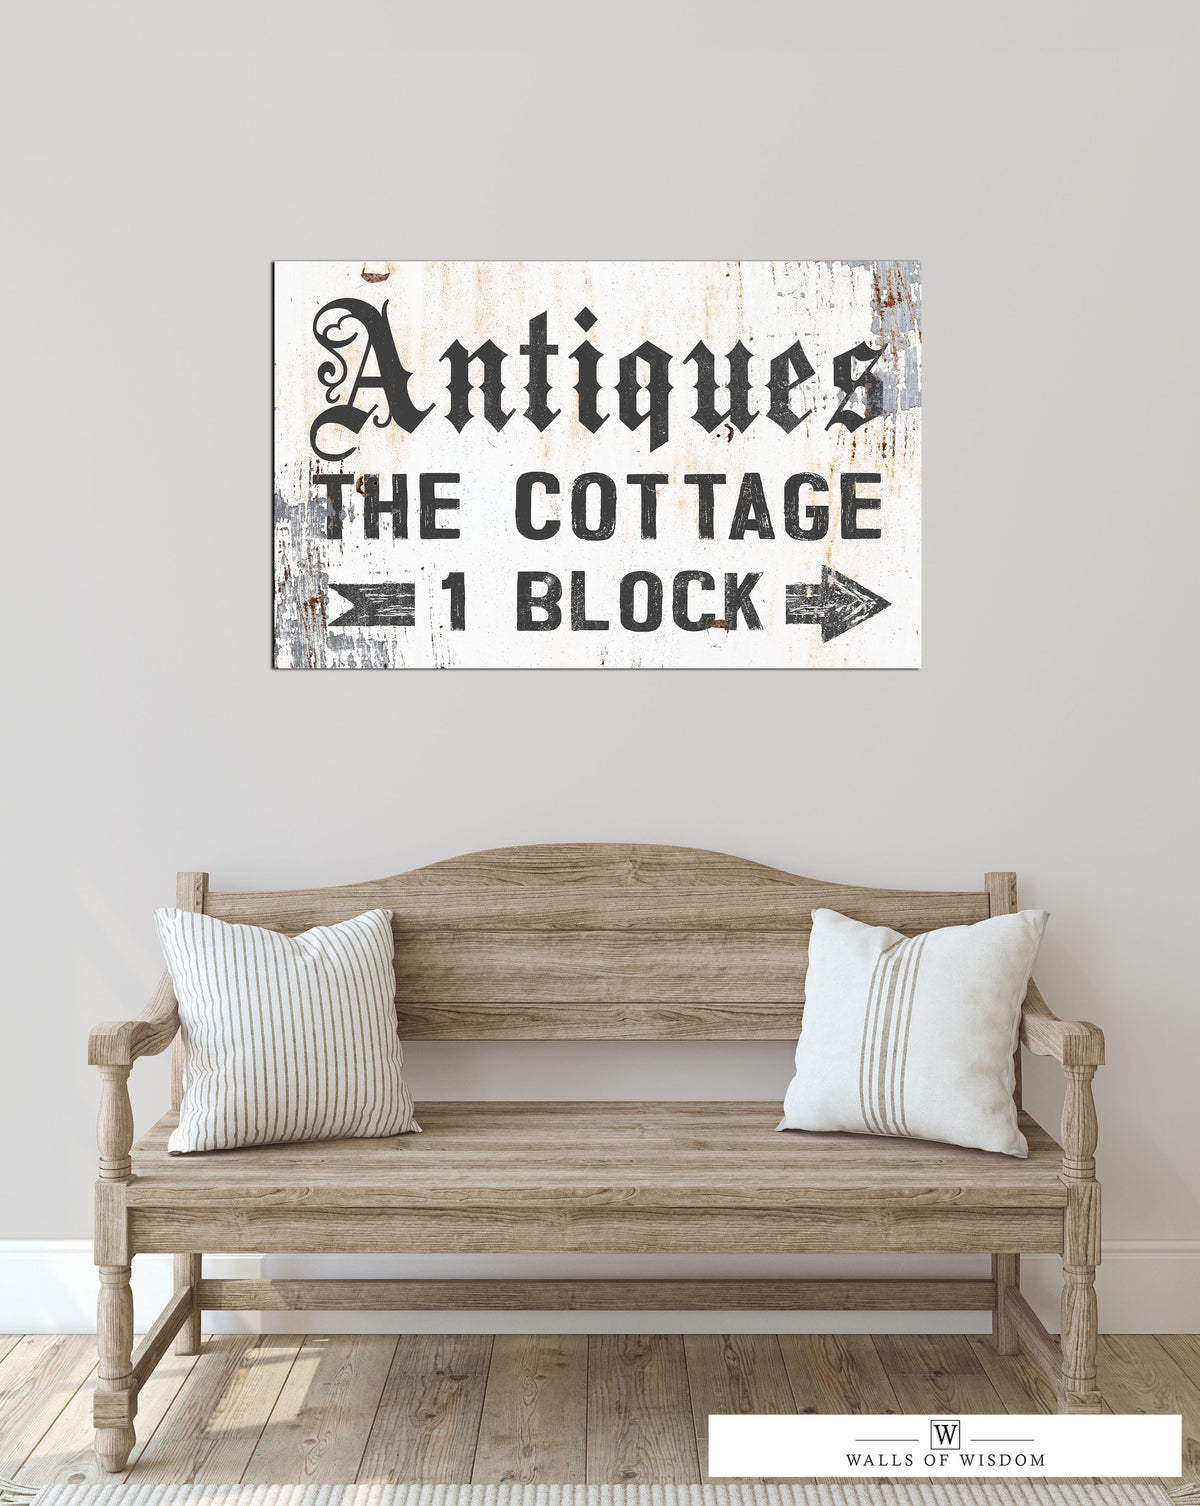 Weathered Antiques 'The Cottage' Canvas Sign - White and Dark Charcoal Grey Aesthetics